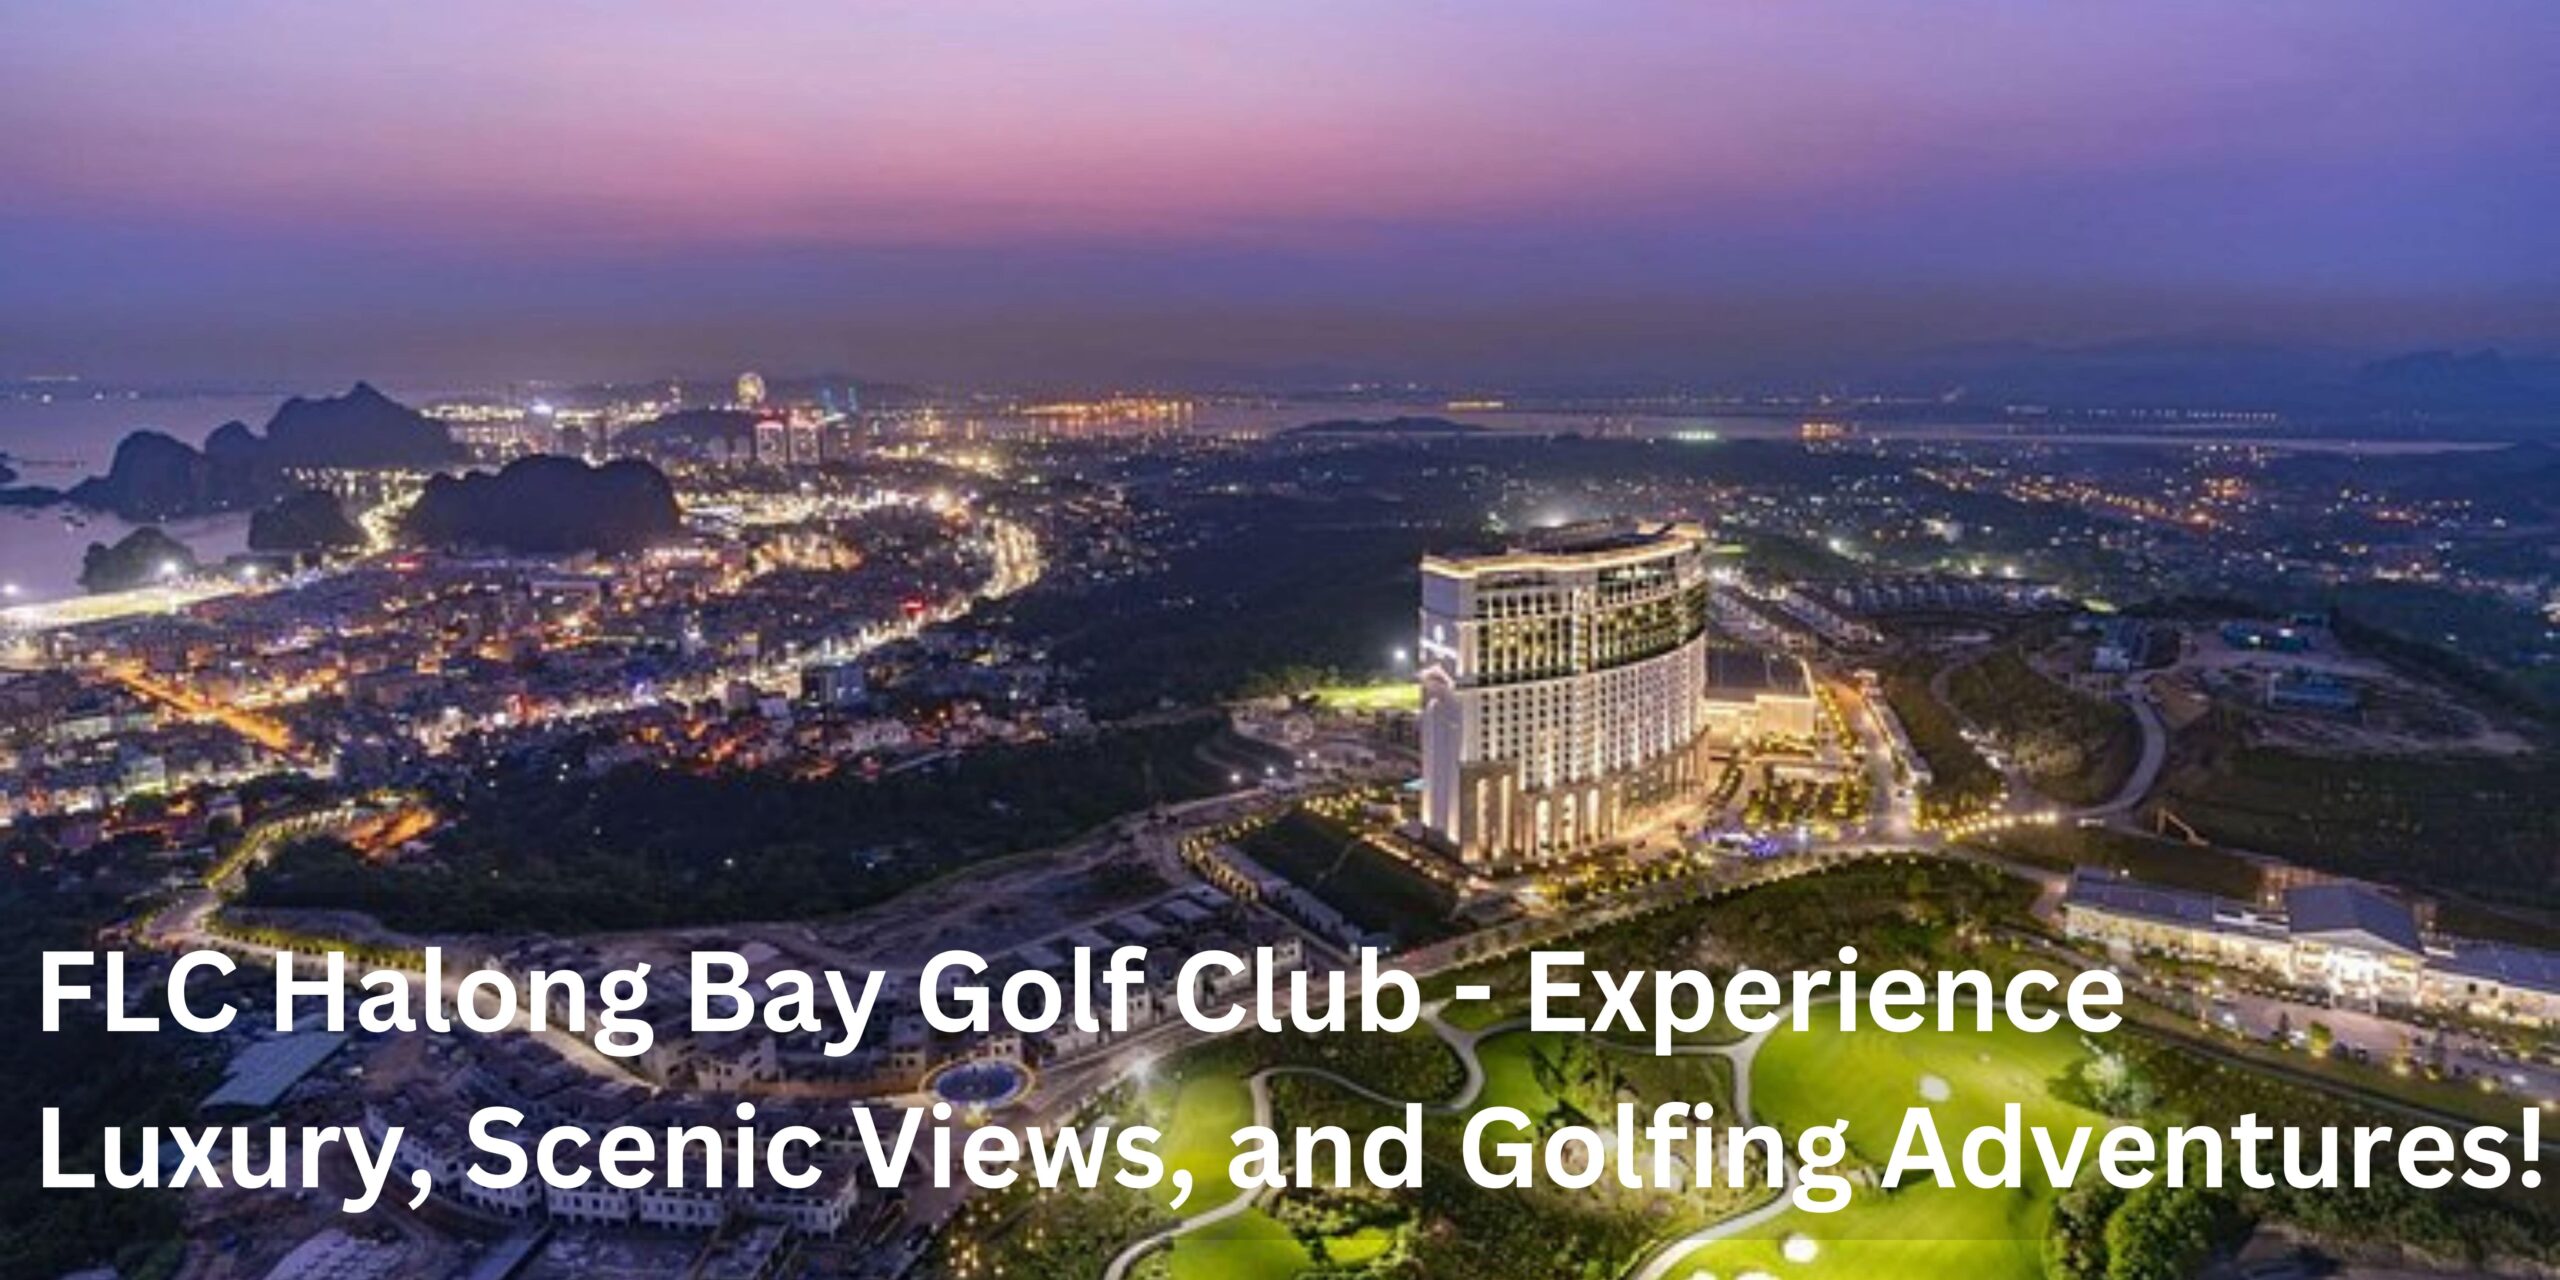 FLC Halong Bay Golf Club - Experience Luxury, Scenic Views, and Golfing Adventures!